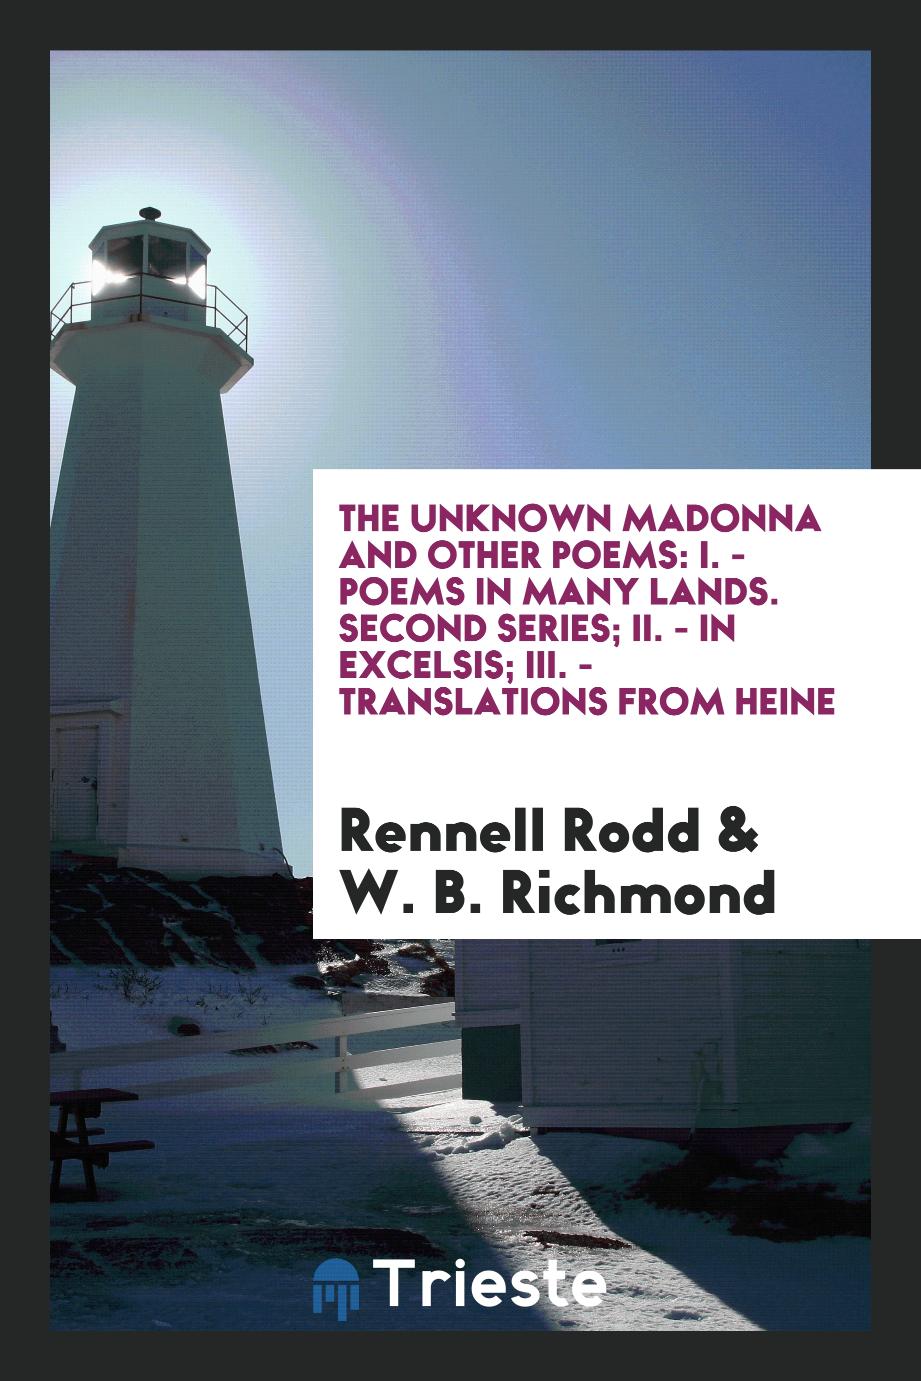 The Unknown Madonna and Other Poems: I. - Poems in Many Lands. Second Series; II. - In Excelsis; III. - Translations from Heine